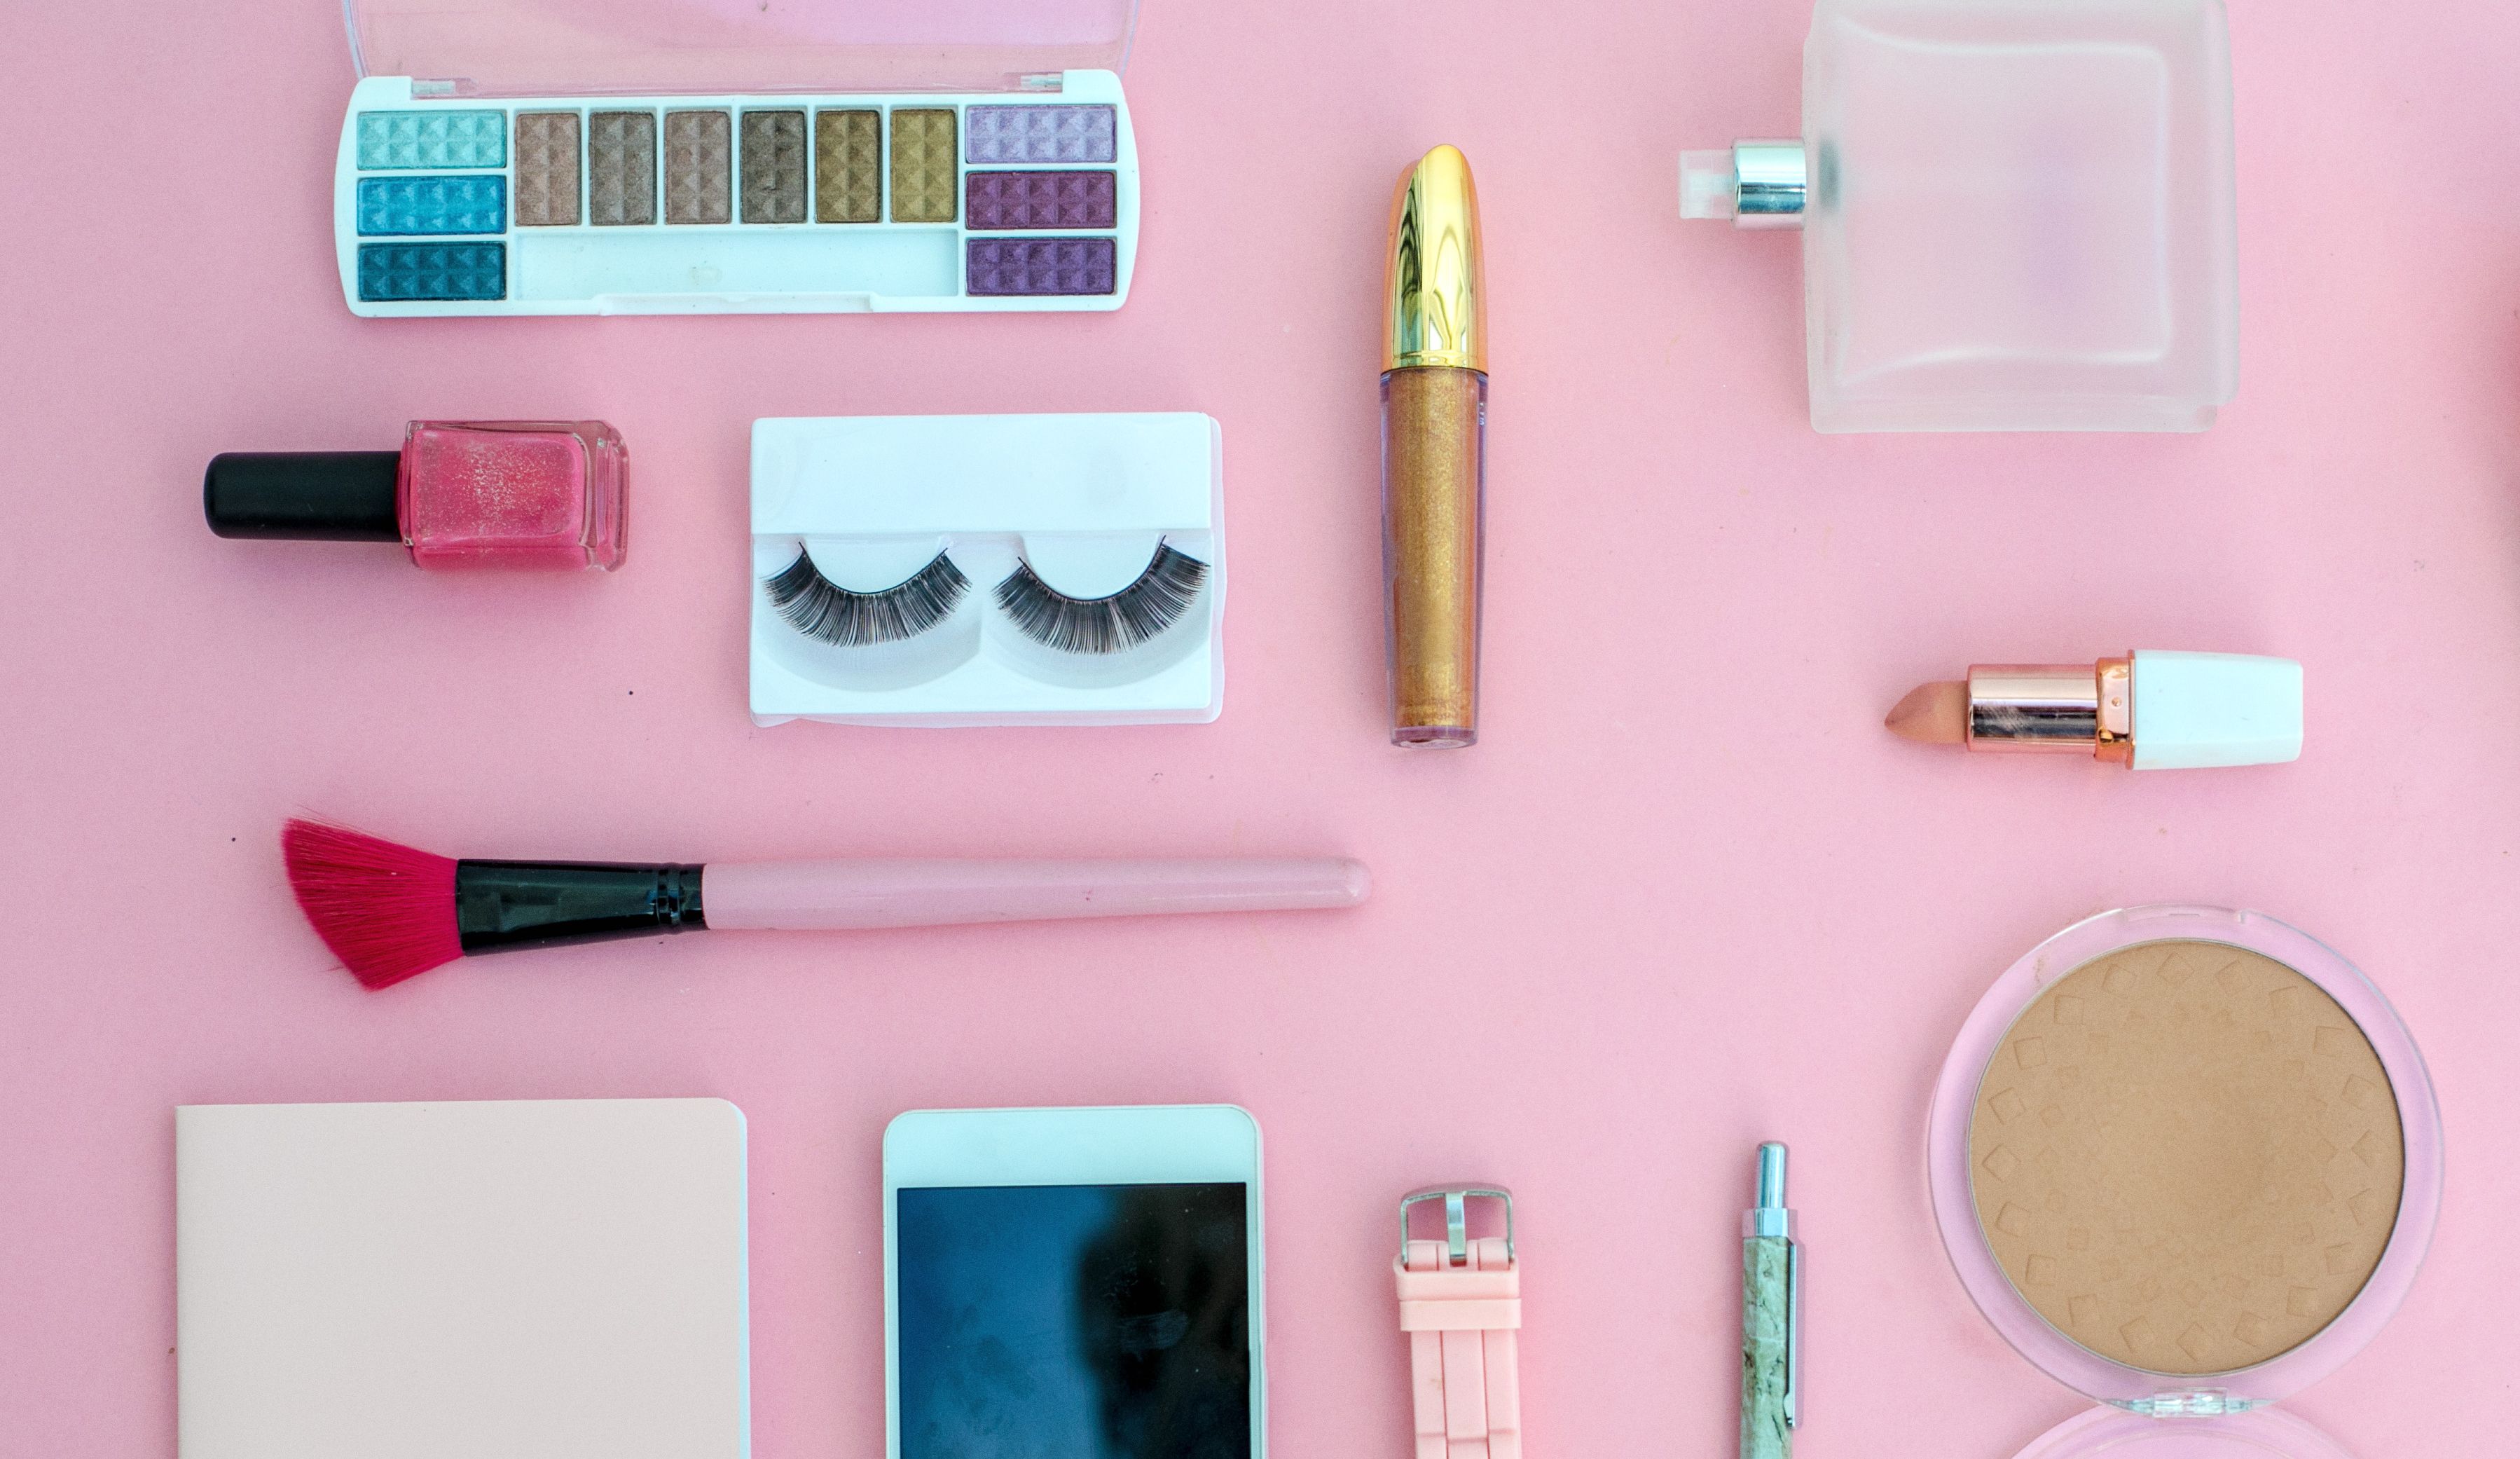 The Most Important Thing When Buying Kid-Friendly Makeup